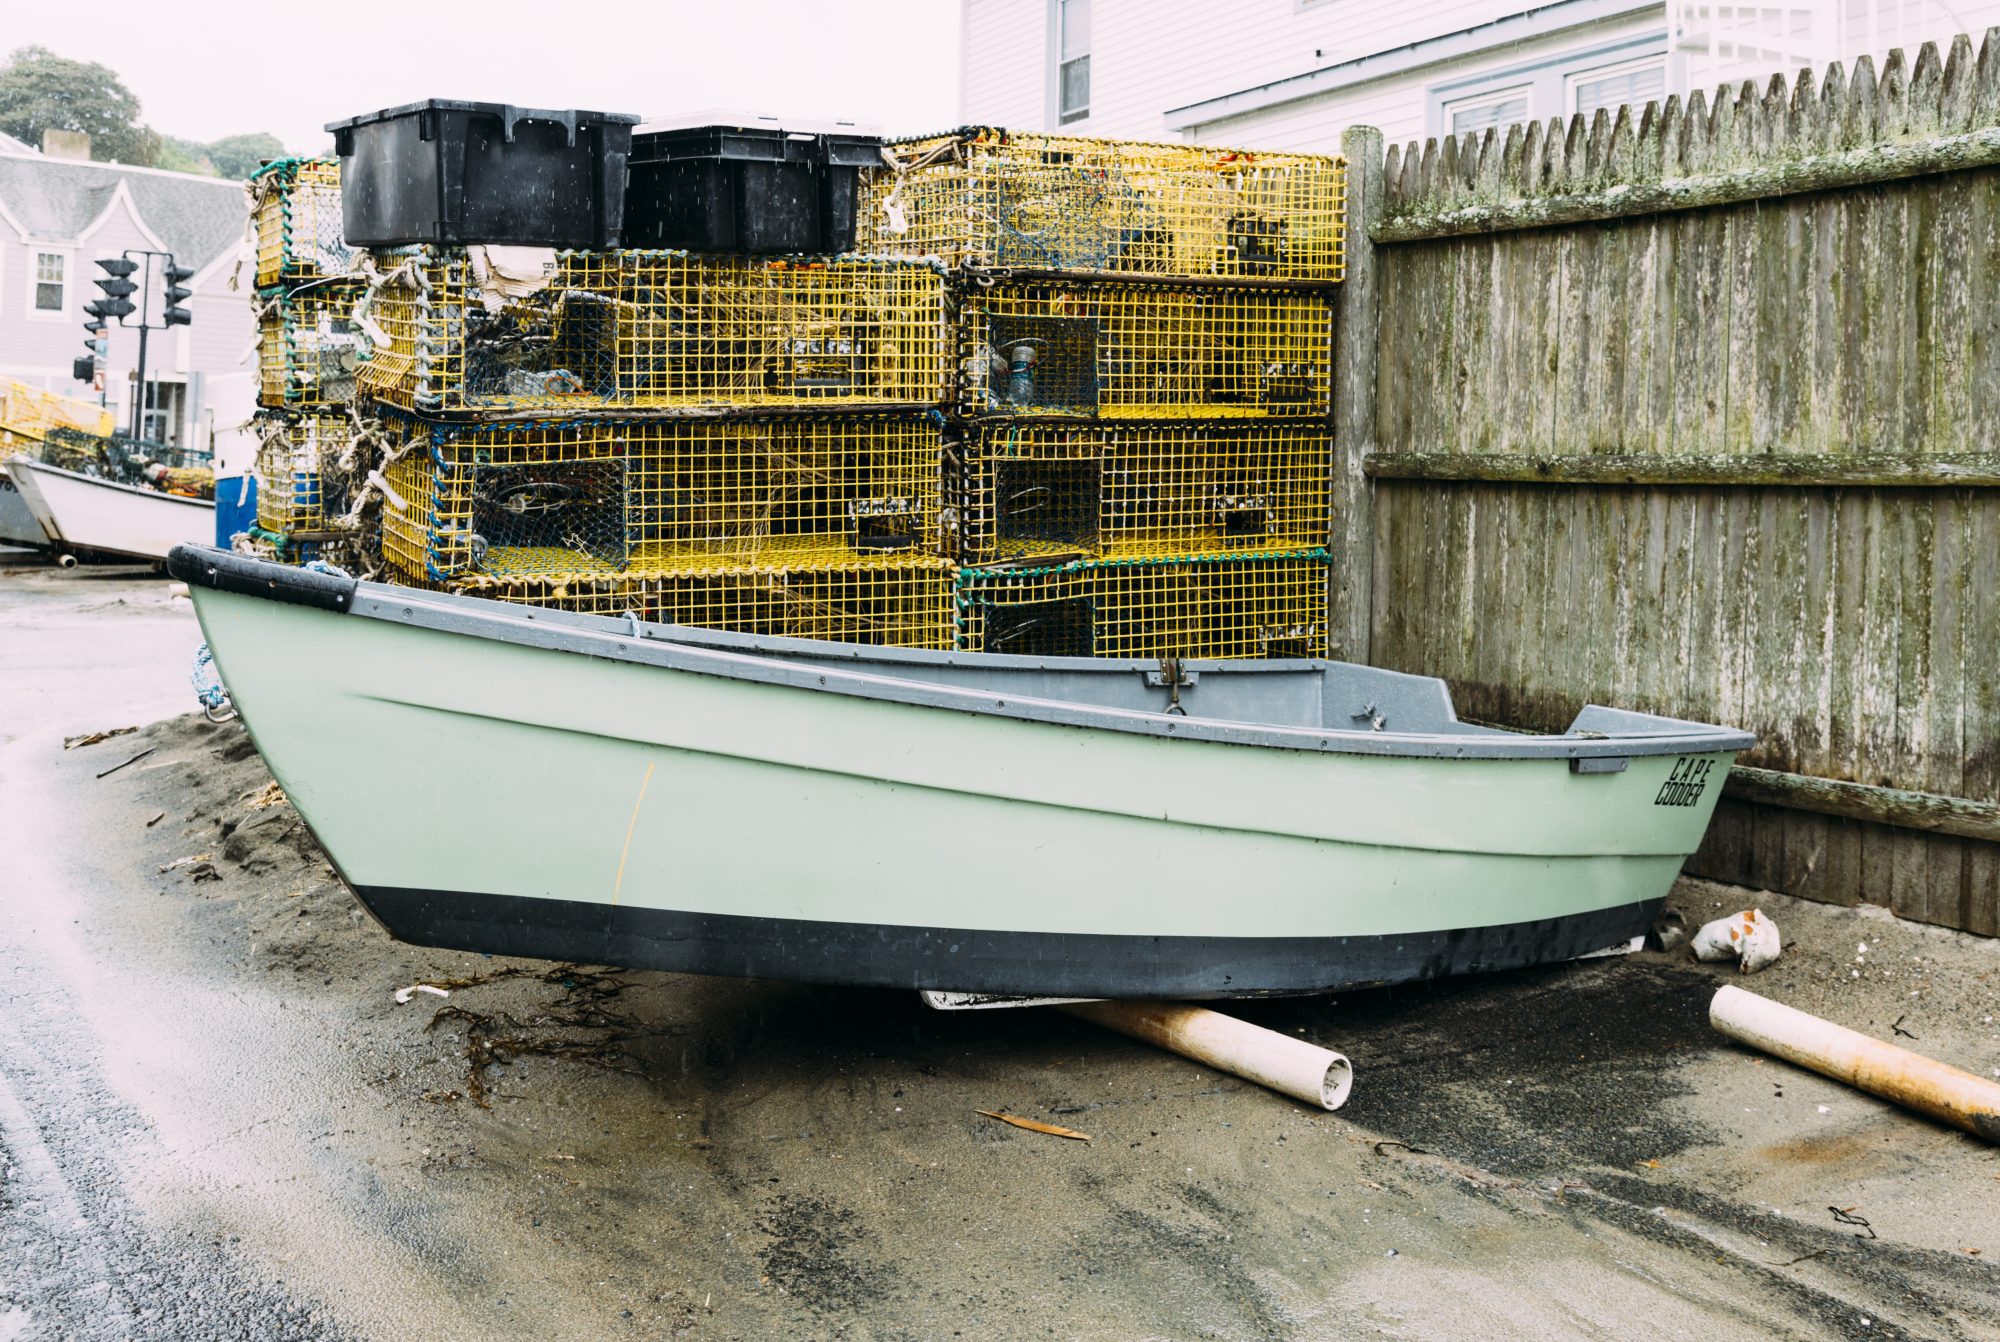 A dory sits next to fishing traps at the Swampscott Fish House.